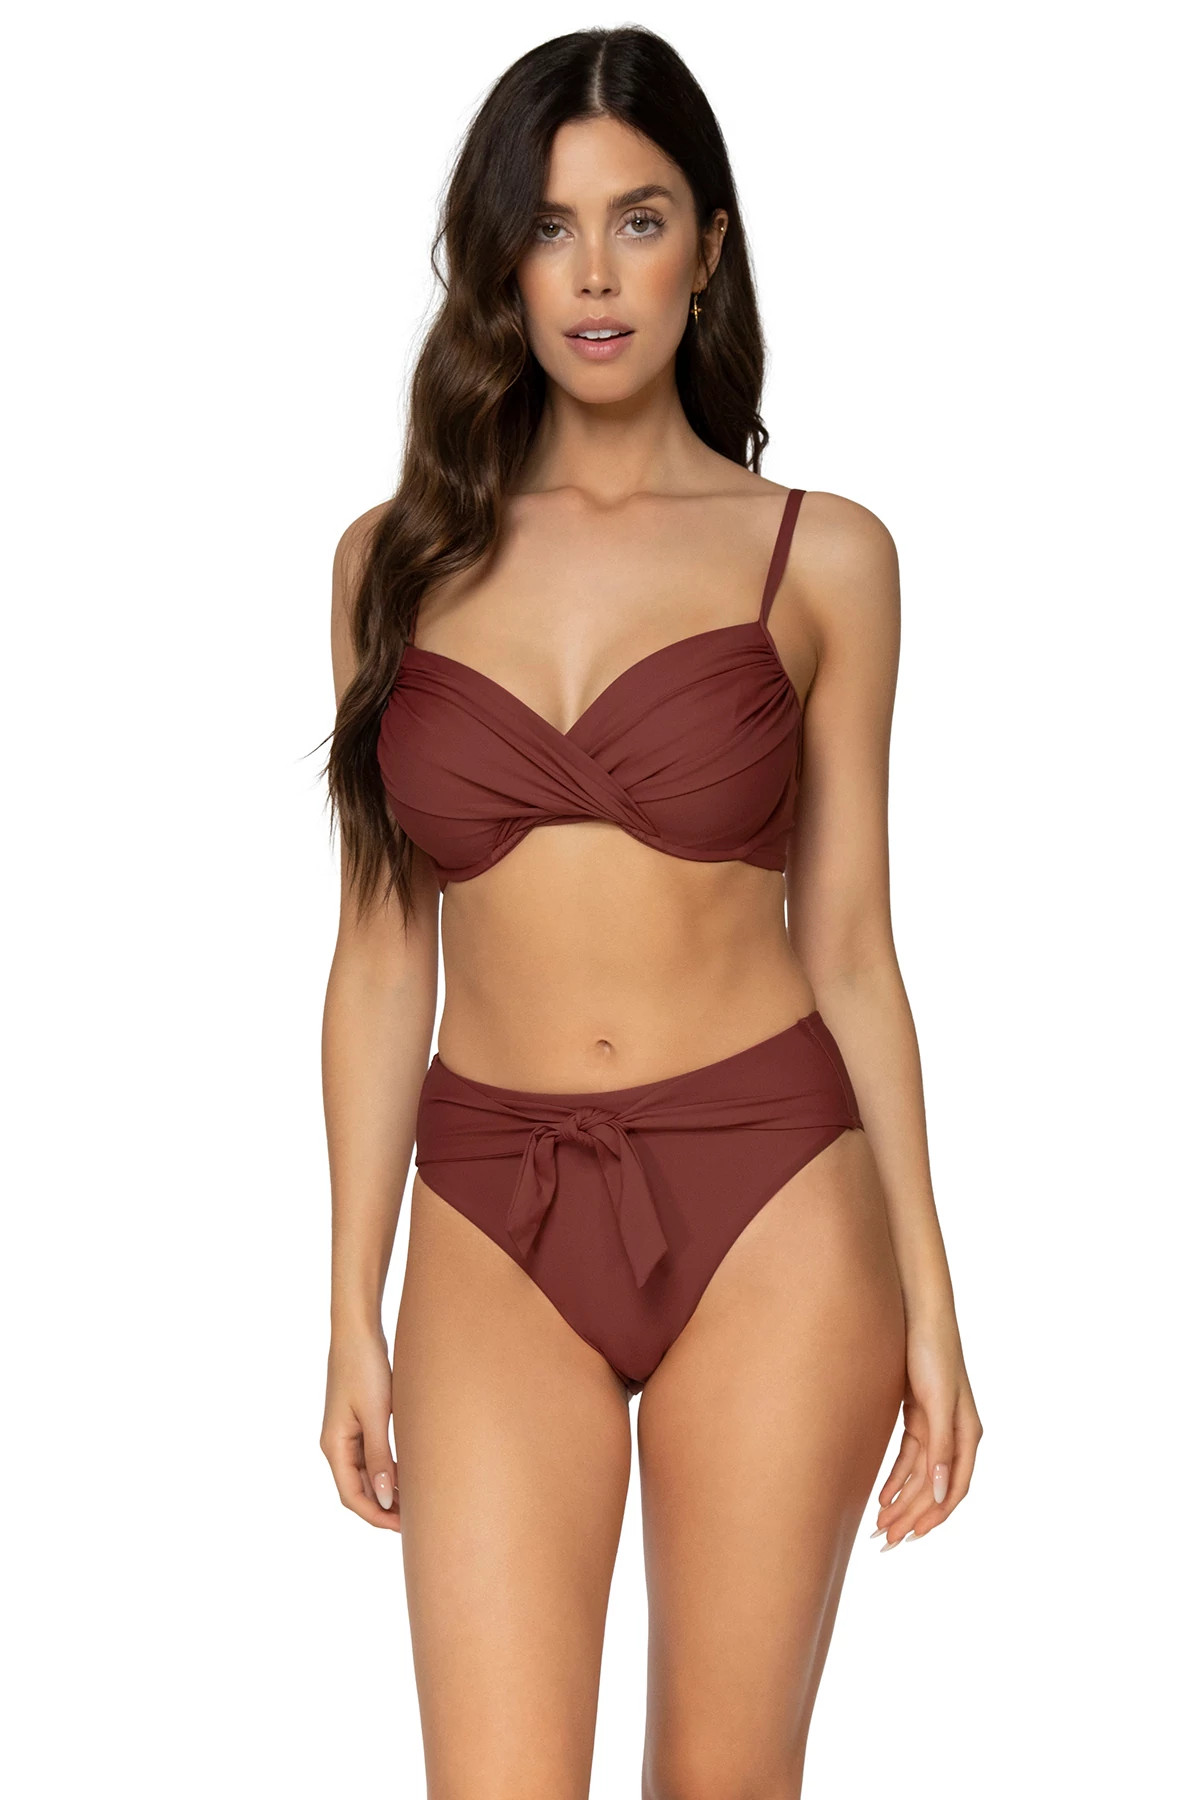 TUSCAN RED Crossroads Underwire Bikini Top (E-H Cup) image number 1